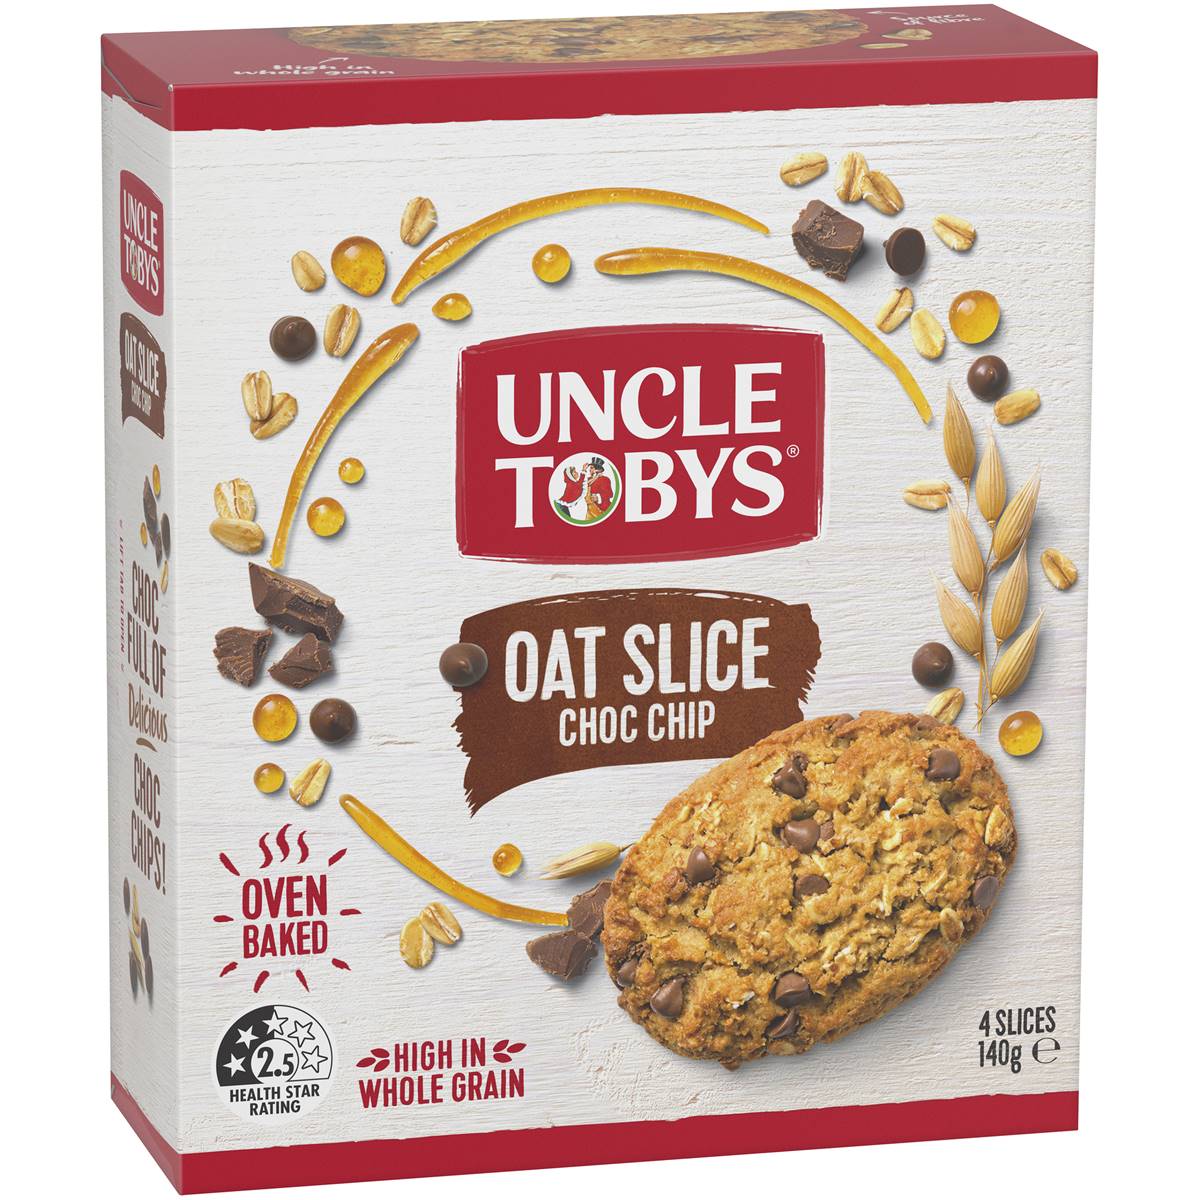 Calories in Uncle Tobys Oat Slice Choc Chip